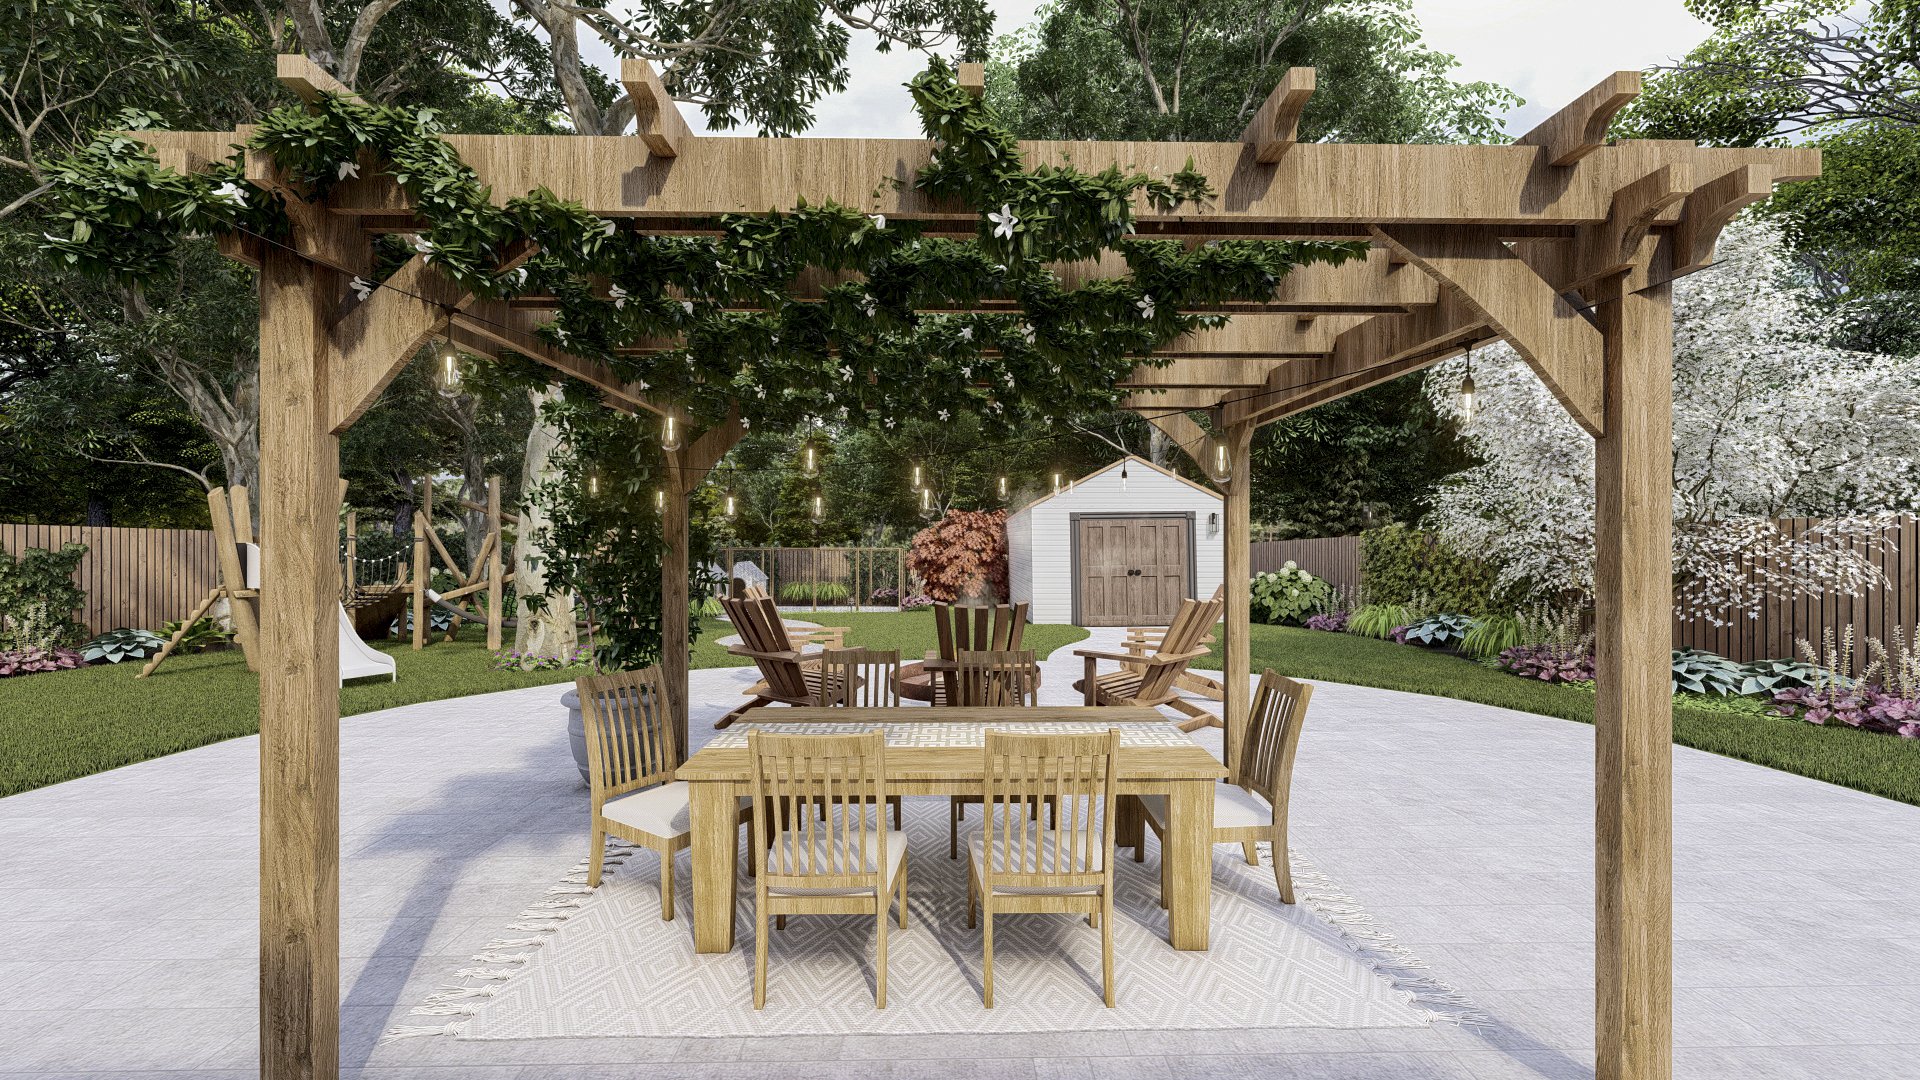 traditional wooden pergola over dining area with trellised flowering vines providing shade and beauty